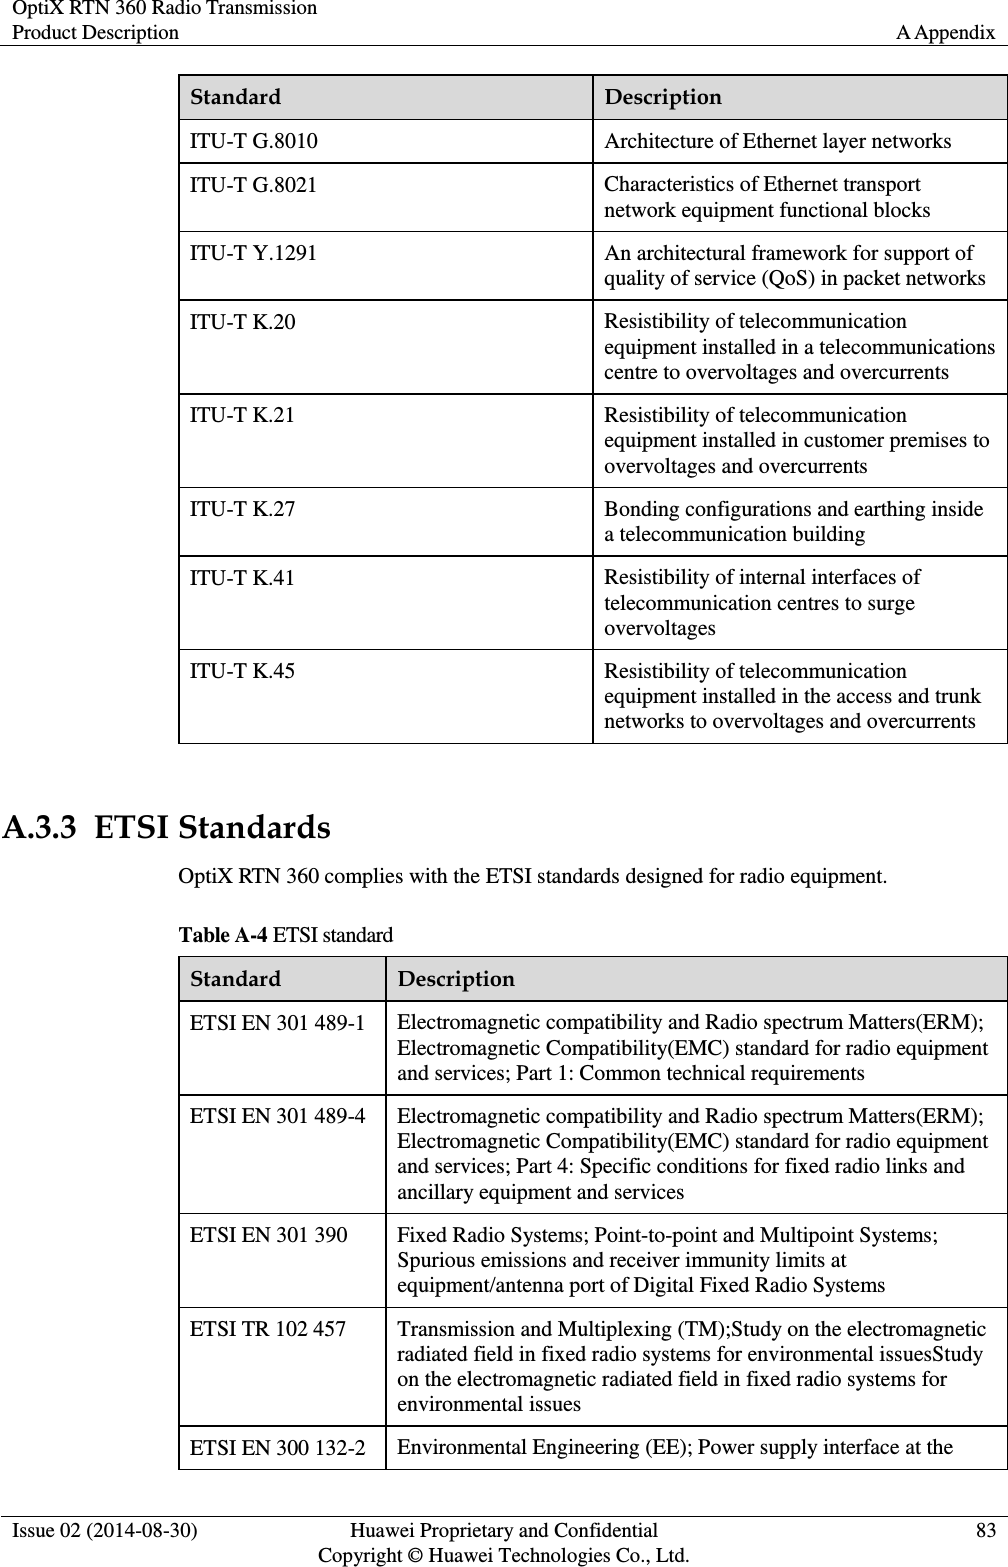 OptiX RTN 360 Radio Transmission Product Description A Appendix  Issue 02 (2014-08-30) Huawei Proprietary and Confidential                                     Copyright © Huawei Technologies Co., Ltd. 83  Standard Description ITU-T G.8010 Architecture of Ethernet layer networks ITU-T G.8021 Characteristics of Ethernet transport network equipment functional blocks ITU-T Y.1291 An architectural framework for support of quality of service (QoS) in packet networks ITU-T K.20 Resistibility of telecommunication equipment installed in a telecommunications centre to overvoltages and overcurrents ITU-T K.21 Resistibility of telecommunication equipment installed in customer premises to overvoltages and overcurrents ITU-T K.27 Bonding configurations and earthing inside a telecommunication building ITU-T K.41 Resistibility of internal interfaces of telecommunication centres to surge overvoltages ITU-T K.45 Resistibility of telecommunication equipment installed in the access and trunk networks to overvoltages and overcurrents  A.3.3  ETSI Standards OptiX RTN 360 complies with the ETSI standards designed for radio equipment. Table A-4 ETSI standard Standard Description ETSI EN 301 489-1   Electromagnetic compatibility and Radio spectrum Matters(ERM); Electromagnetic Compatibility(EMC) standard for radio equipment and services; Part 1: Common technical requirements ETSI EN 301 489-4   Electromagnetic compatibility and Radio spectrum Matters(ERM); Electromagnetic Compatibility(EMC) standard for radio equipment and services; Part 4: Specific conditions for fixed radio links and ancillary equipment and services ETSI EN 301 390 Fixed Radio Systems; Point-to-point and Multipoint Systems; Spurious emissions and receiver immunity limits at equipment/antenna port of Digital Fixed Radio Systems ETSI TR 102 457 Transmission and Multiplexing (TM);Study on the electromagnetic radiated field in fixed radio systems for environmental issuesStudy on the electromagnetic radiated field in fixed radio systems for environmental issues   ETSI EN 300 132-2 Environmental Engineering (EE); Power supply interface at the 